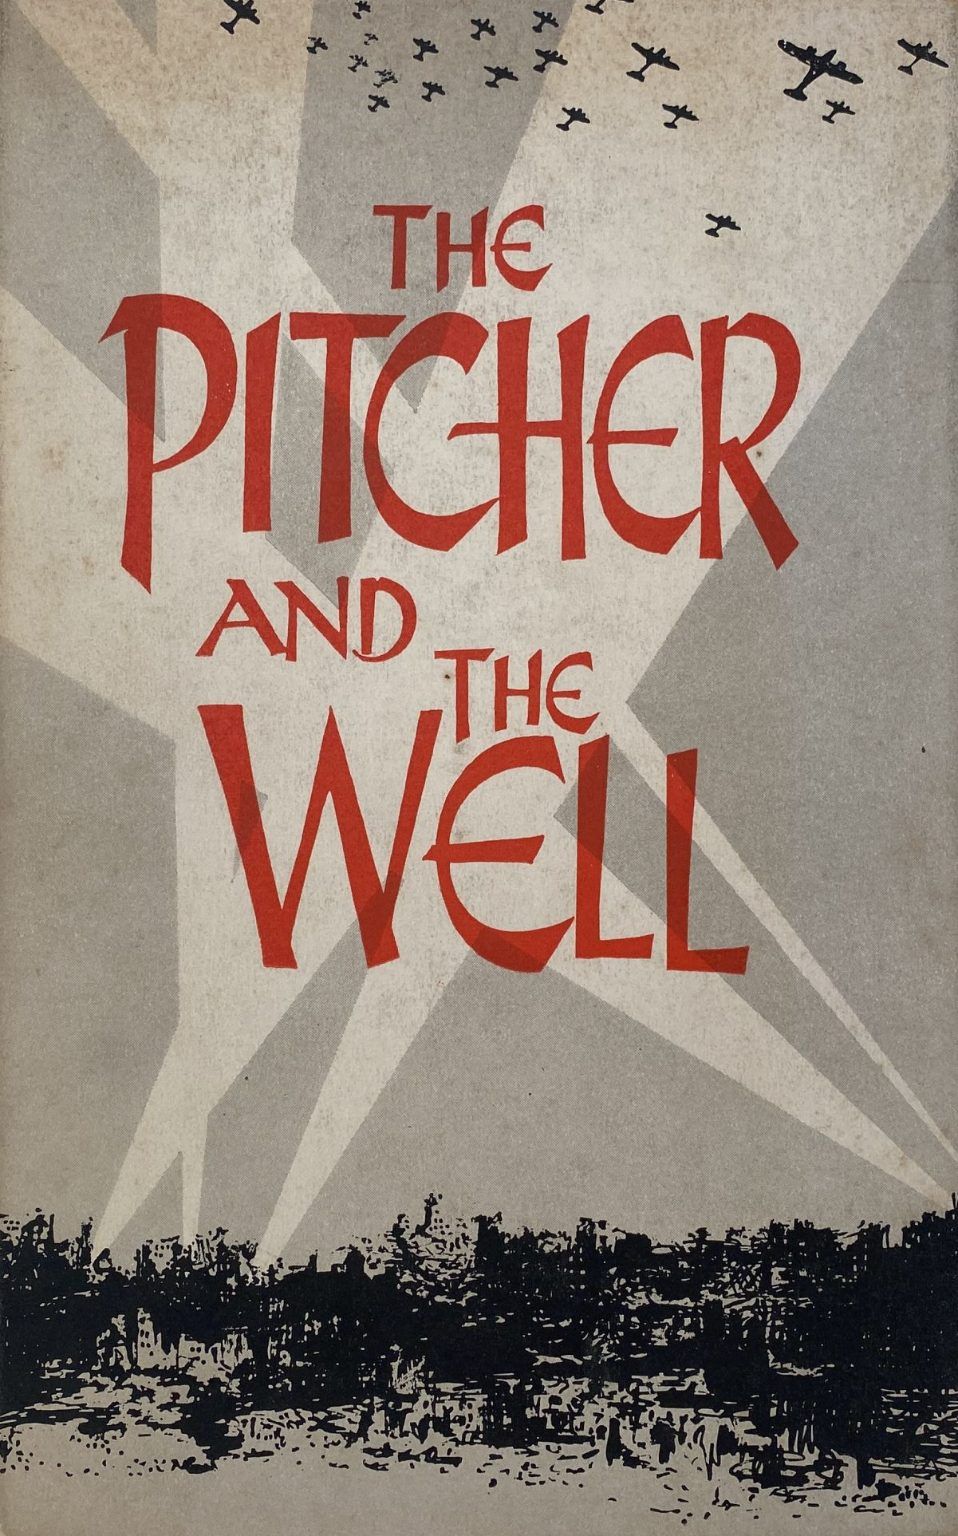 THE PITCHER AND THE WELL